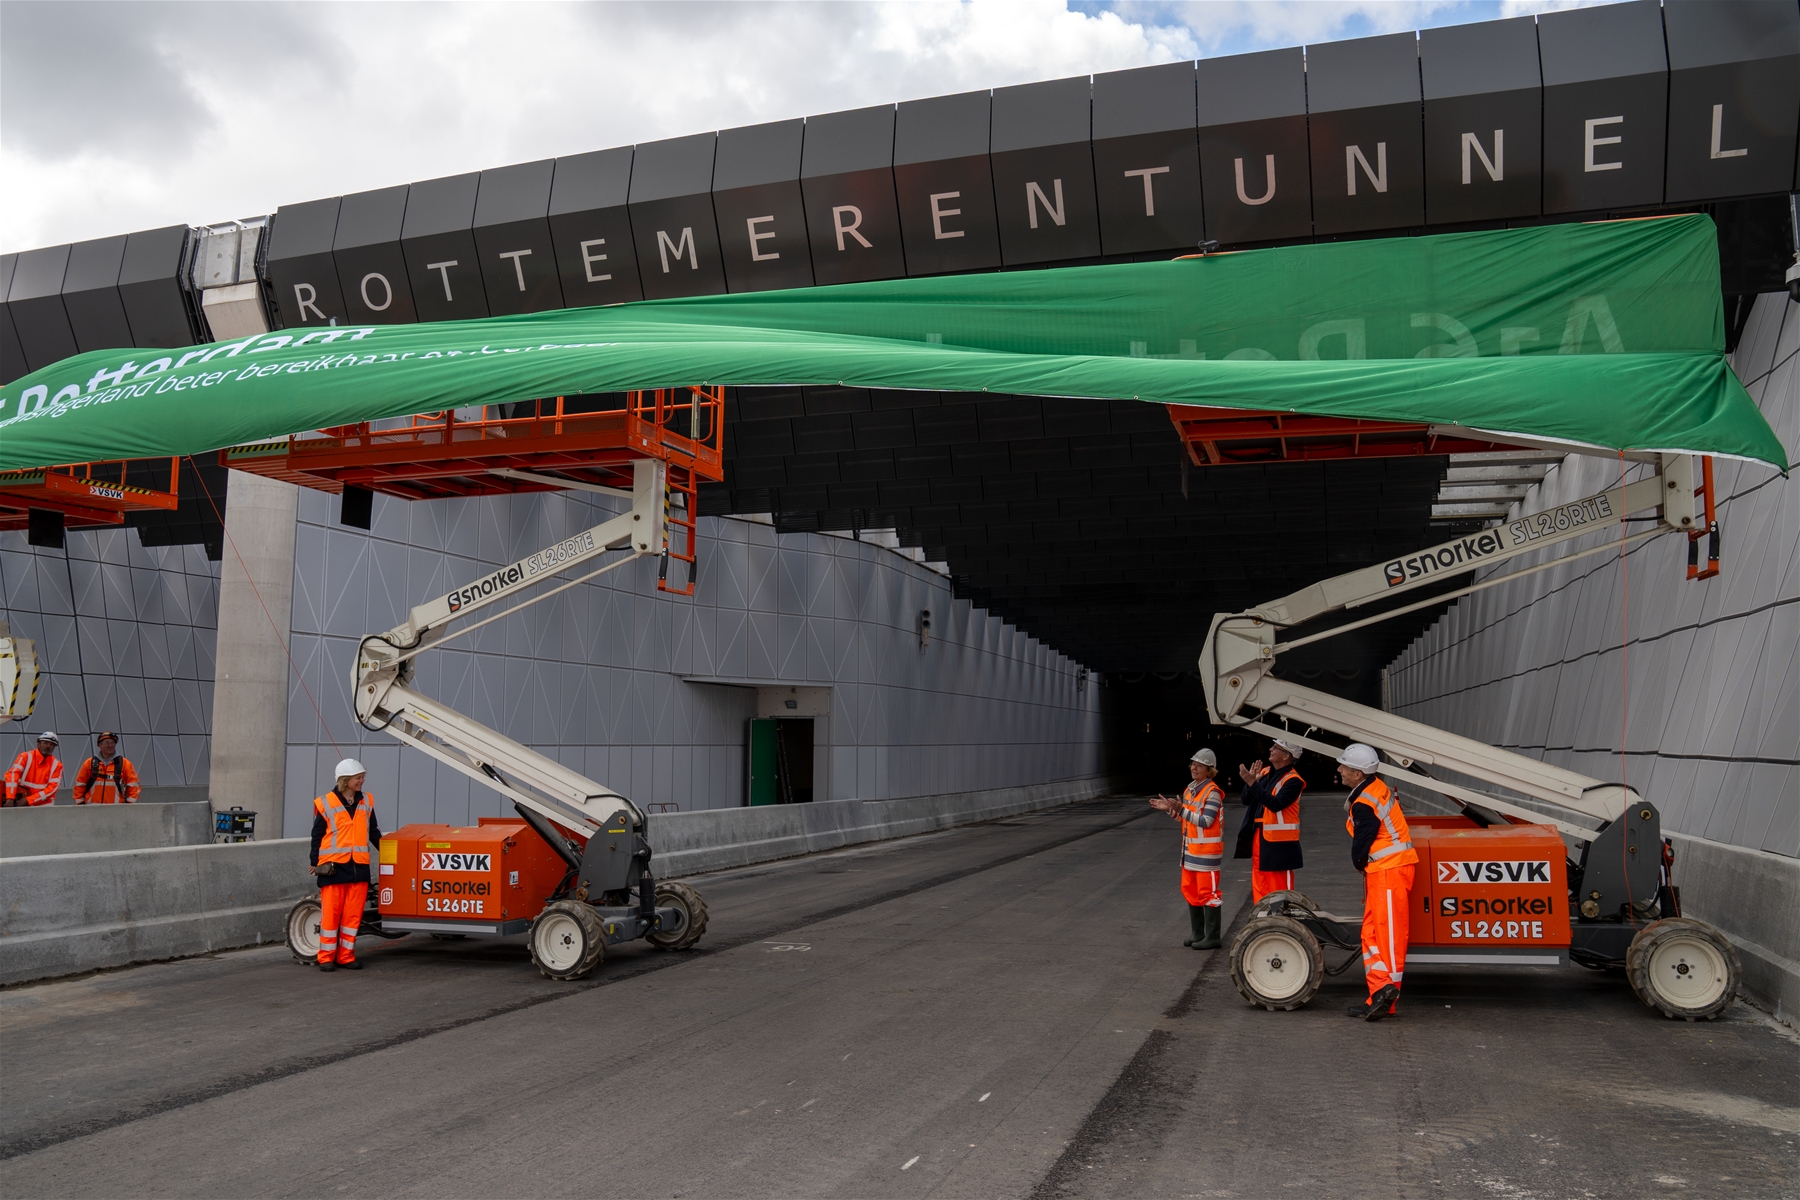 Onthulling naam Rottemerentunnel